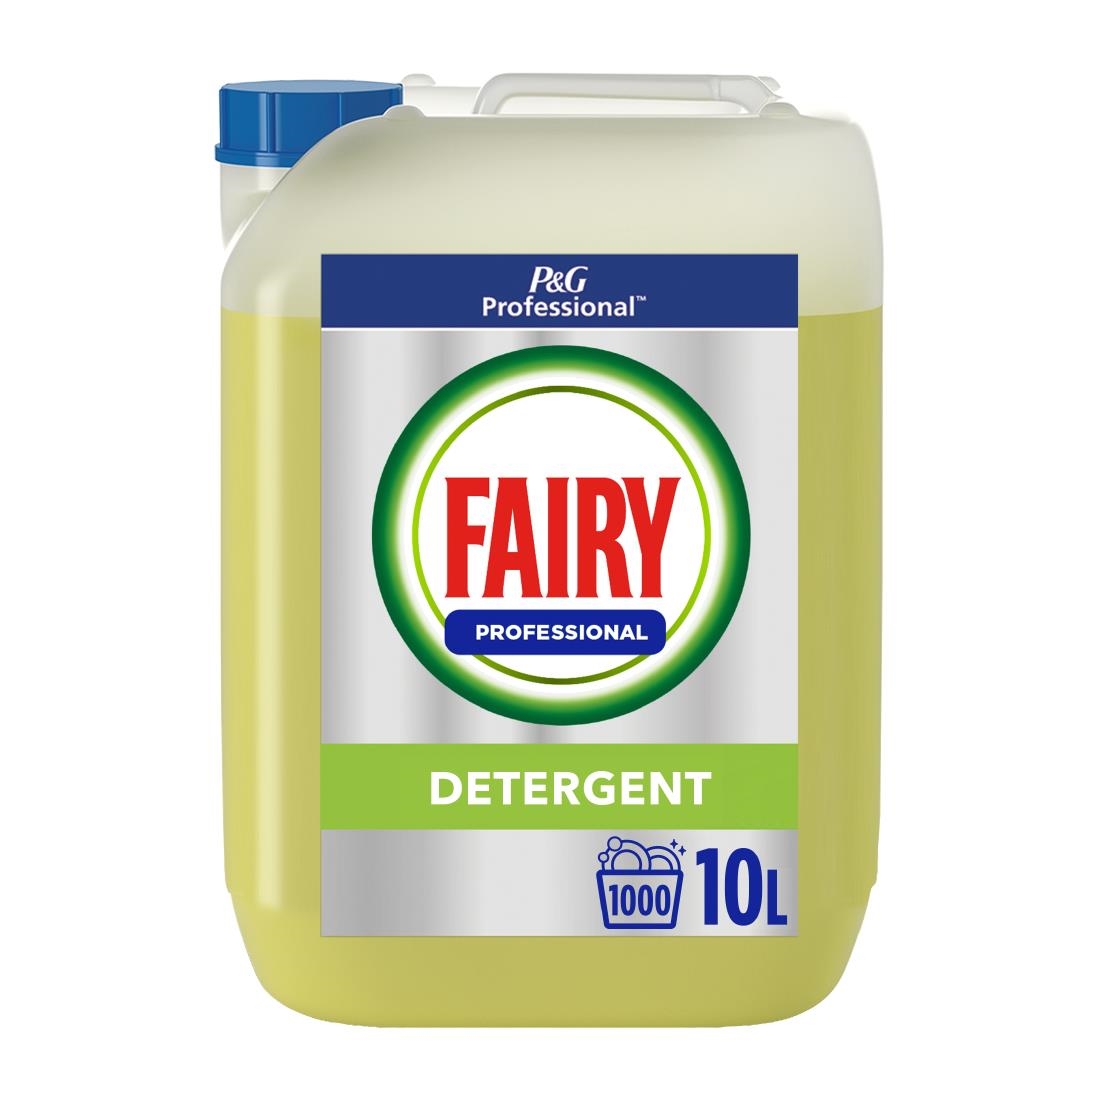 Fairy Professional Commercial Automatic Dishwasher Detergent 10Ltr (DX572)